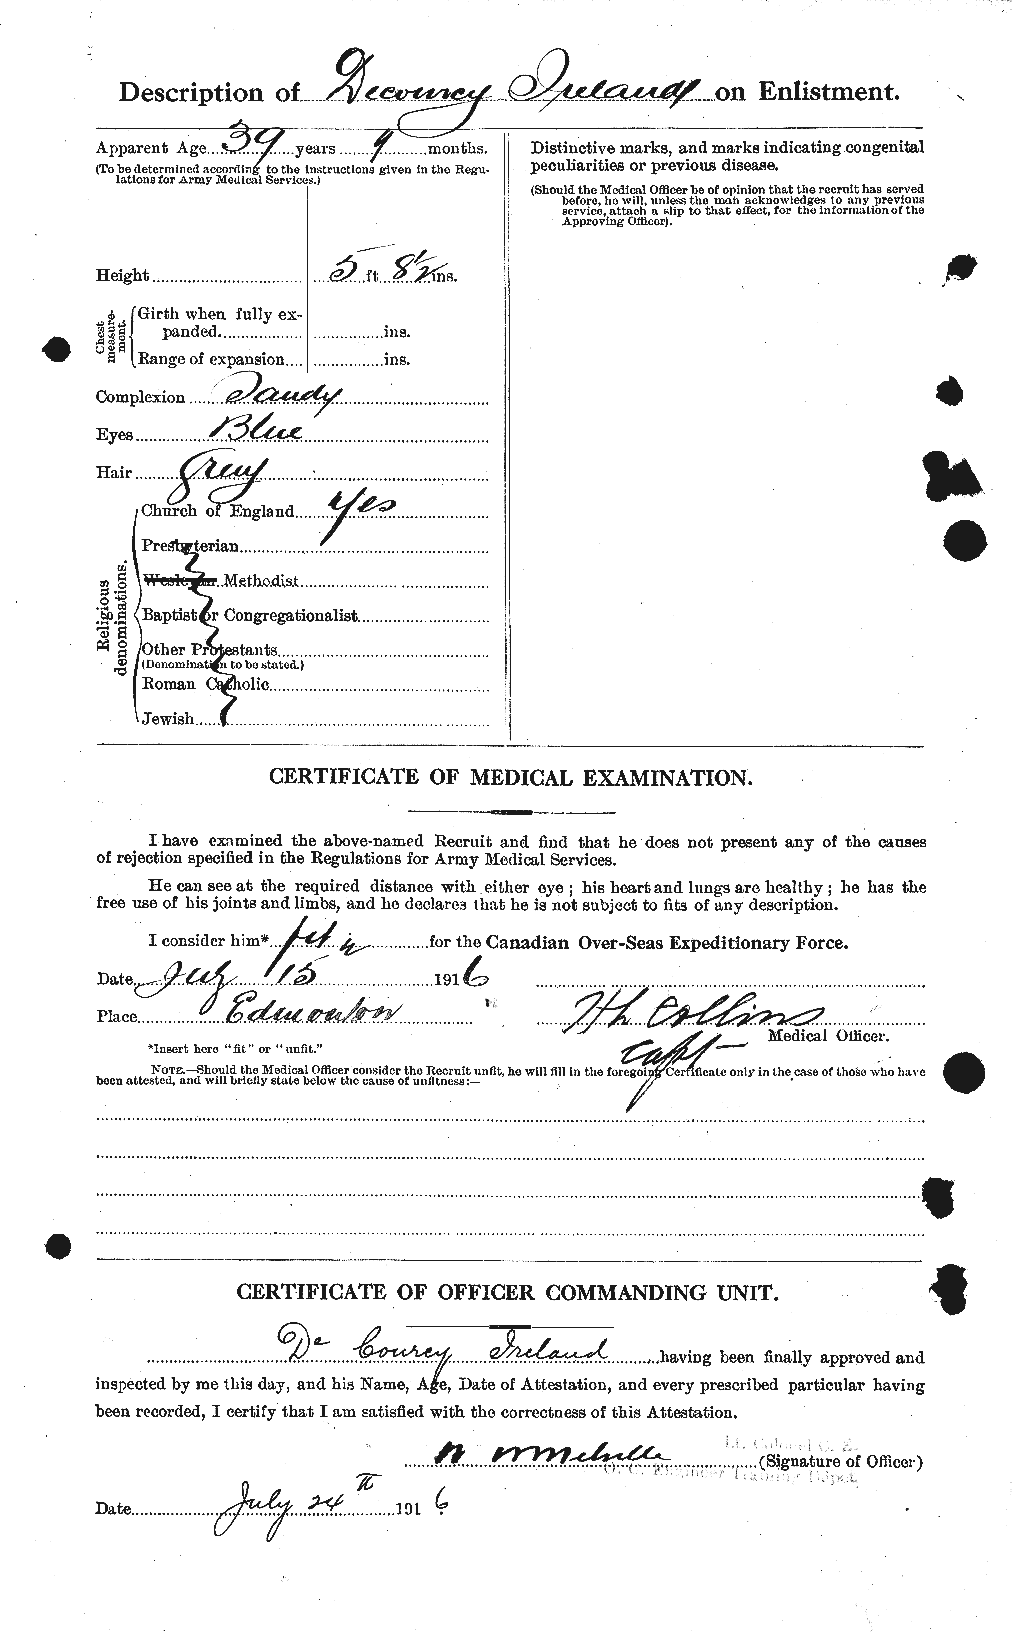 Personnel Records of the First World War - CEF 415597b